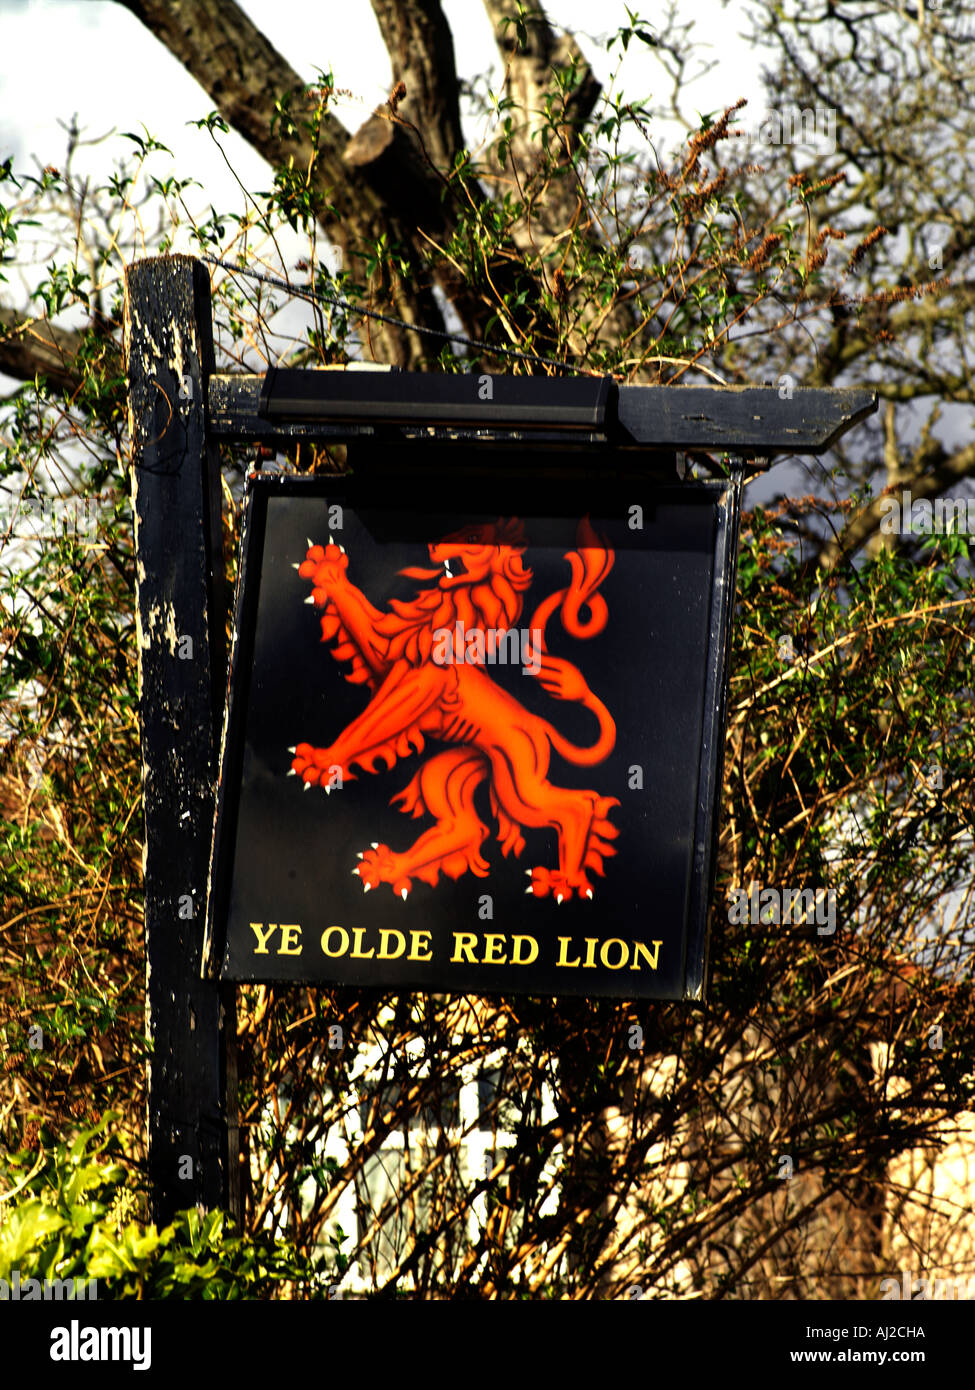 Ye Old Red Lion Pub Sign in Cheam Surrey England Stockfoto